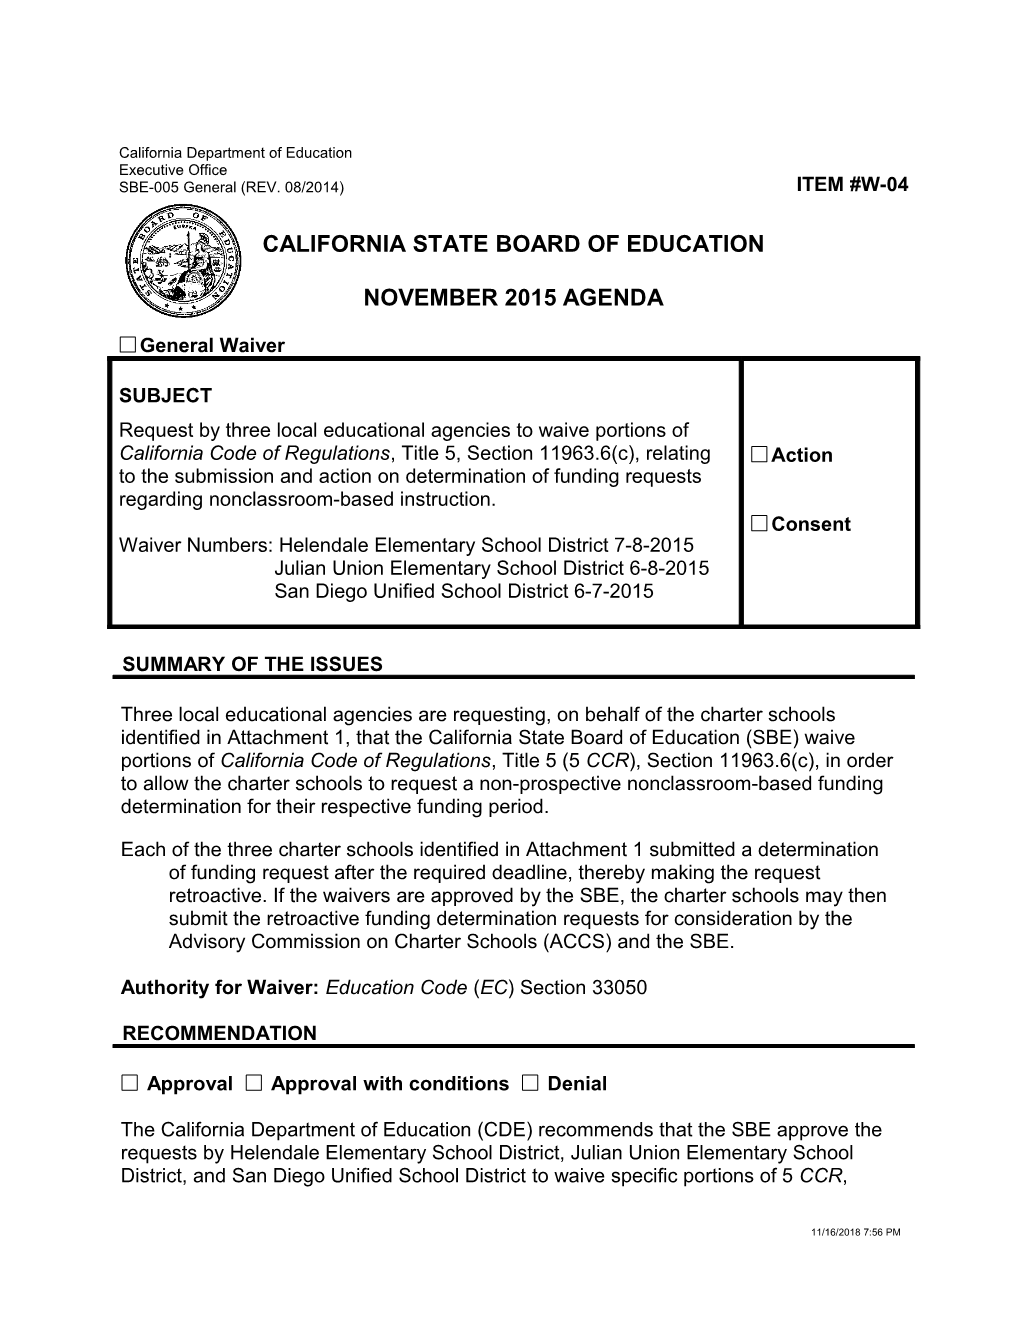 November 2015 Waiver Item W-04 - Meeting Agendas (CA State Board of Education)